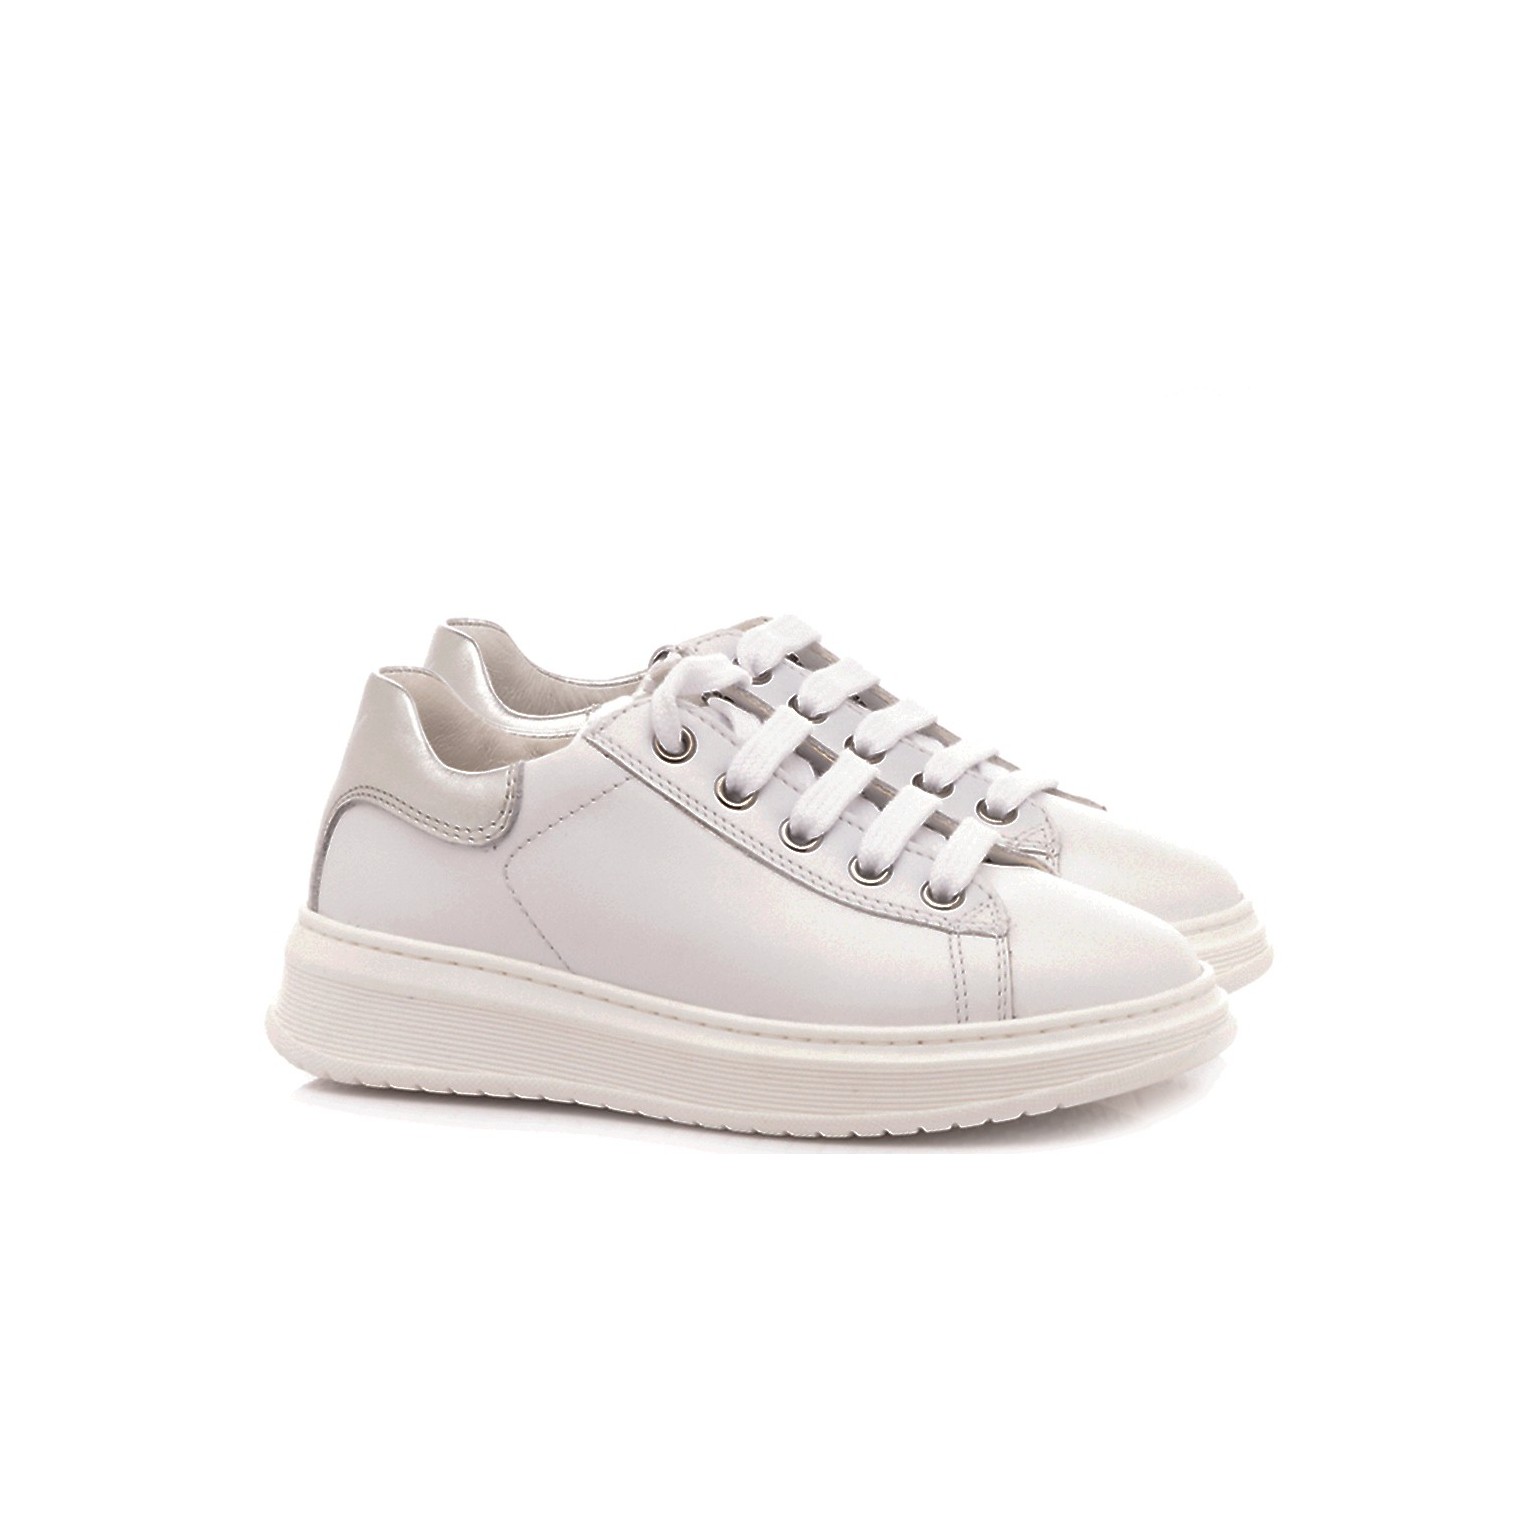 Naturino  Children's Shoes Sneakers Leather White-Silver